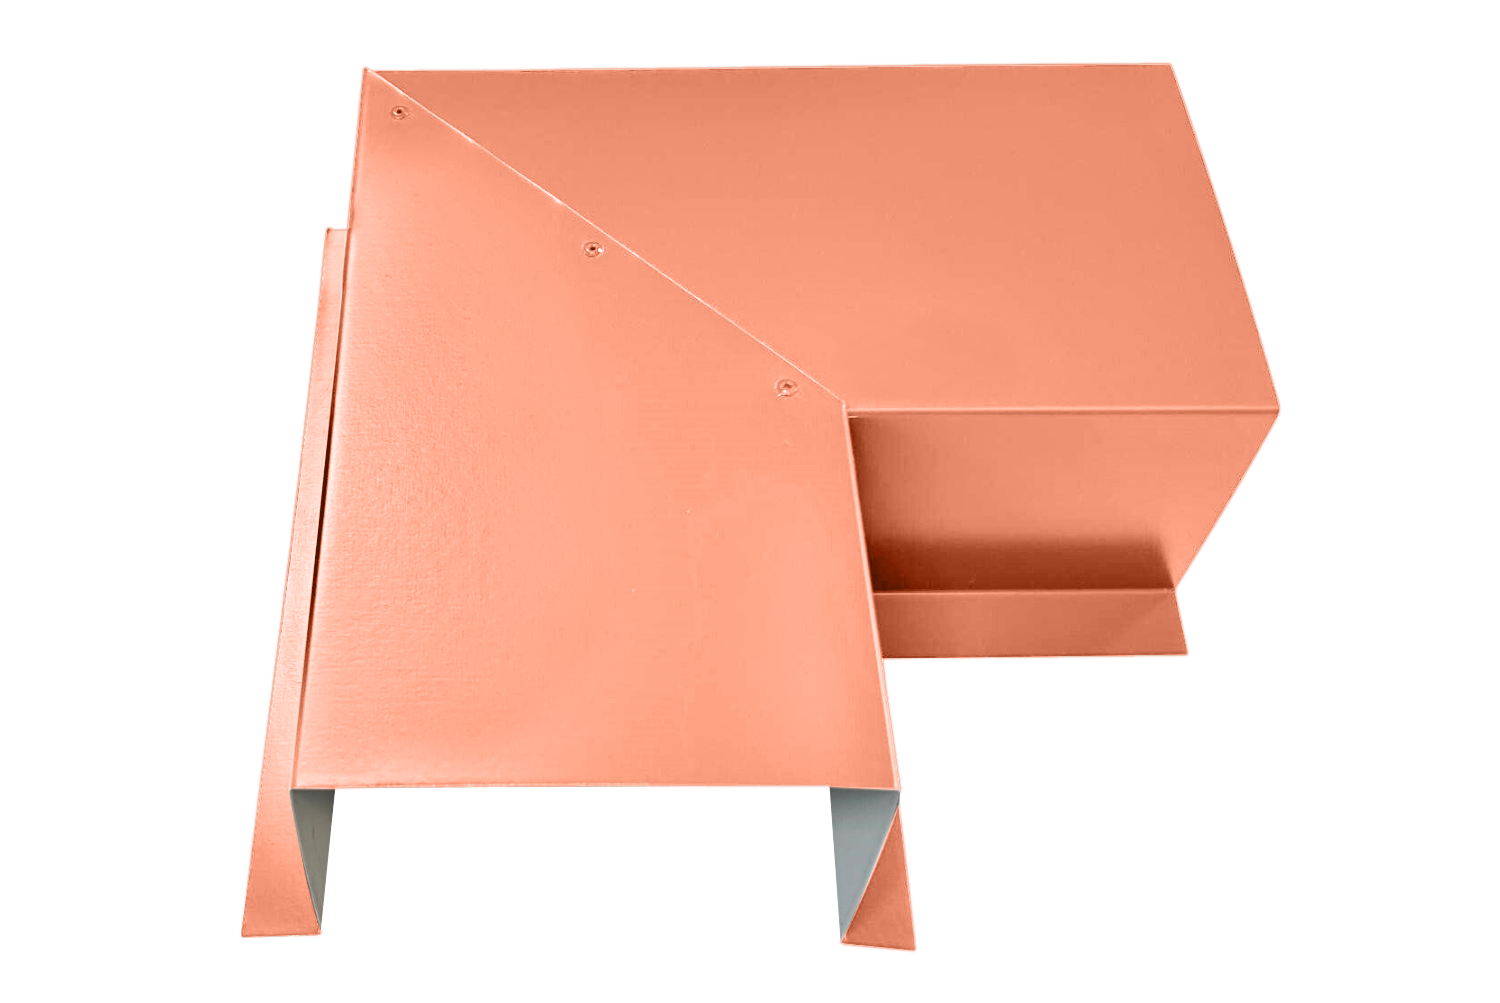 A geometric, orange-colored metal sculpture with sharp angles and folded edges, resembling an abstract structure made from premium quality 24 gauge steel. The metal surface appears smooth and reflective. The Perma Cover Commercial Series - 24 Gauge Line Set Cover Side Turning Elbows - Premium Quality is viewed from an overhead perspective against a white background.